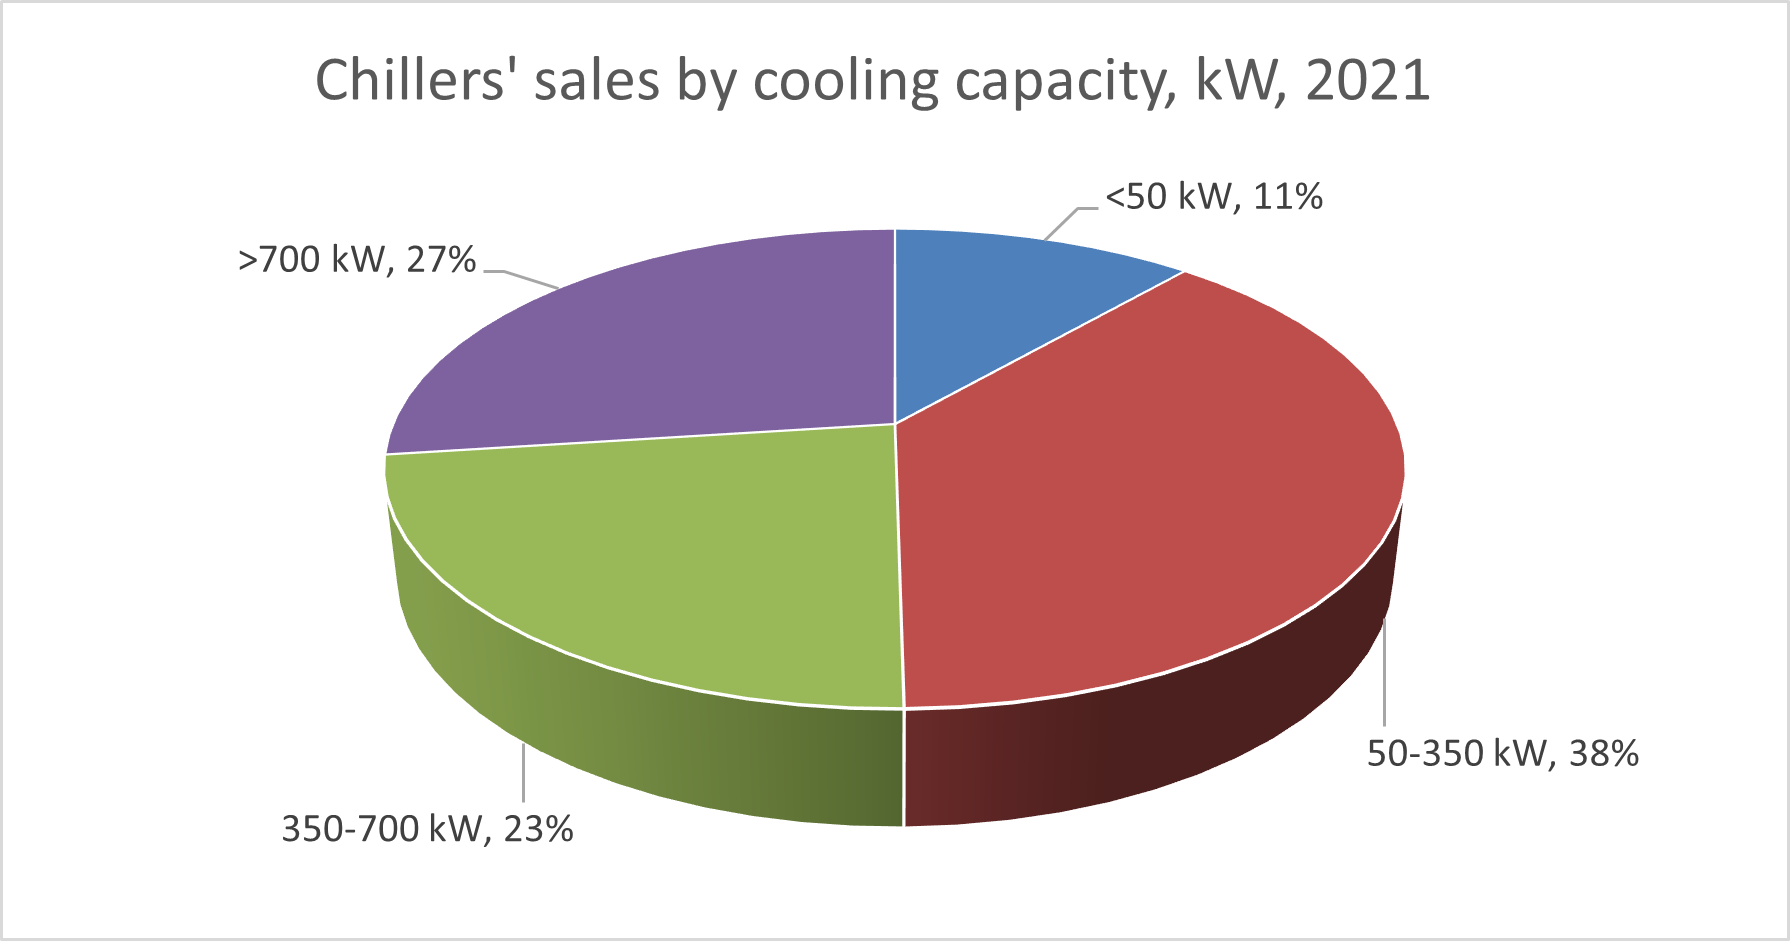 Chiller sales by cooling capacity (percentage in kW), EU 28 – 2021, from Eurovent Market intelligence